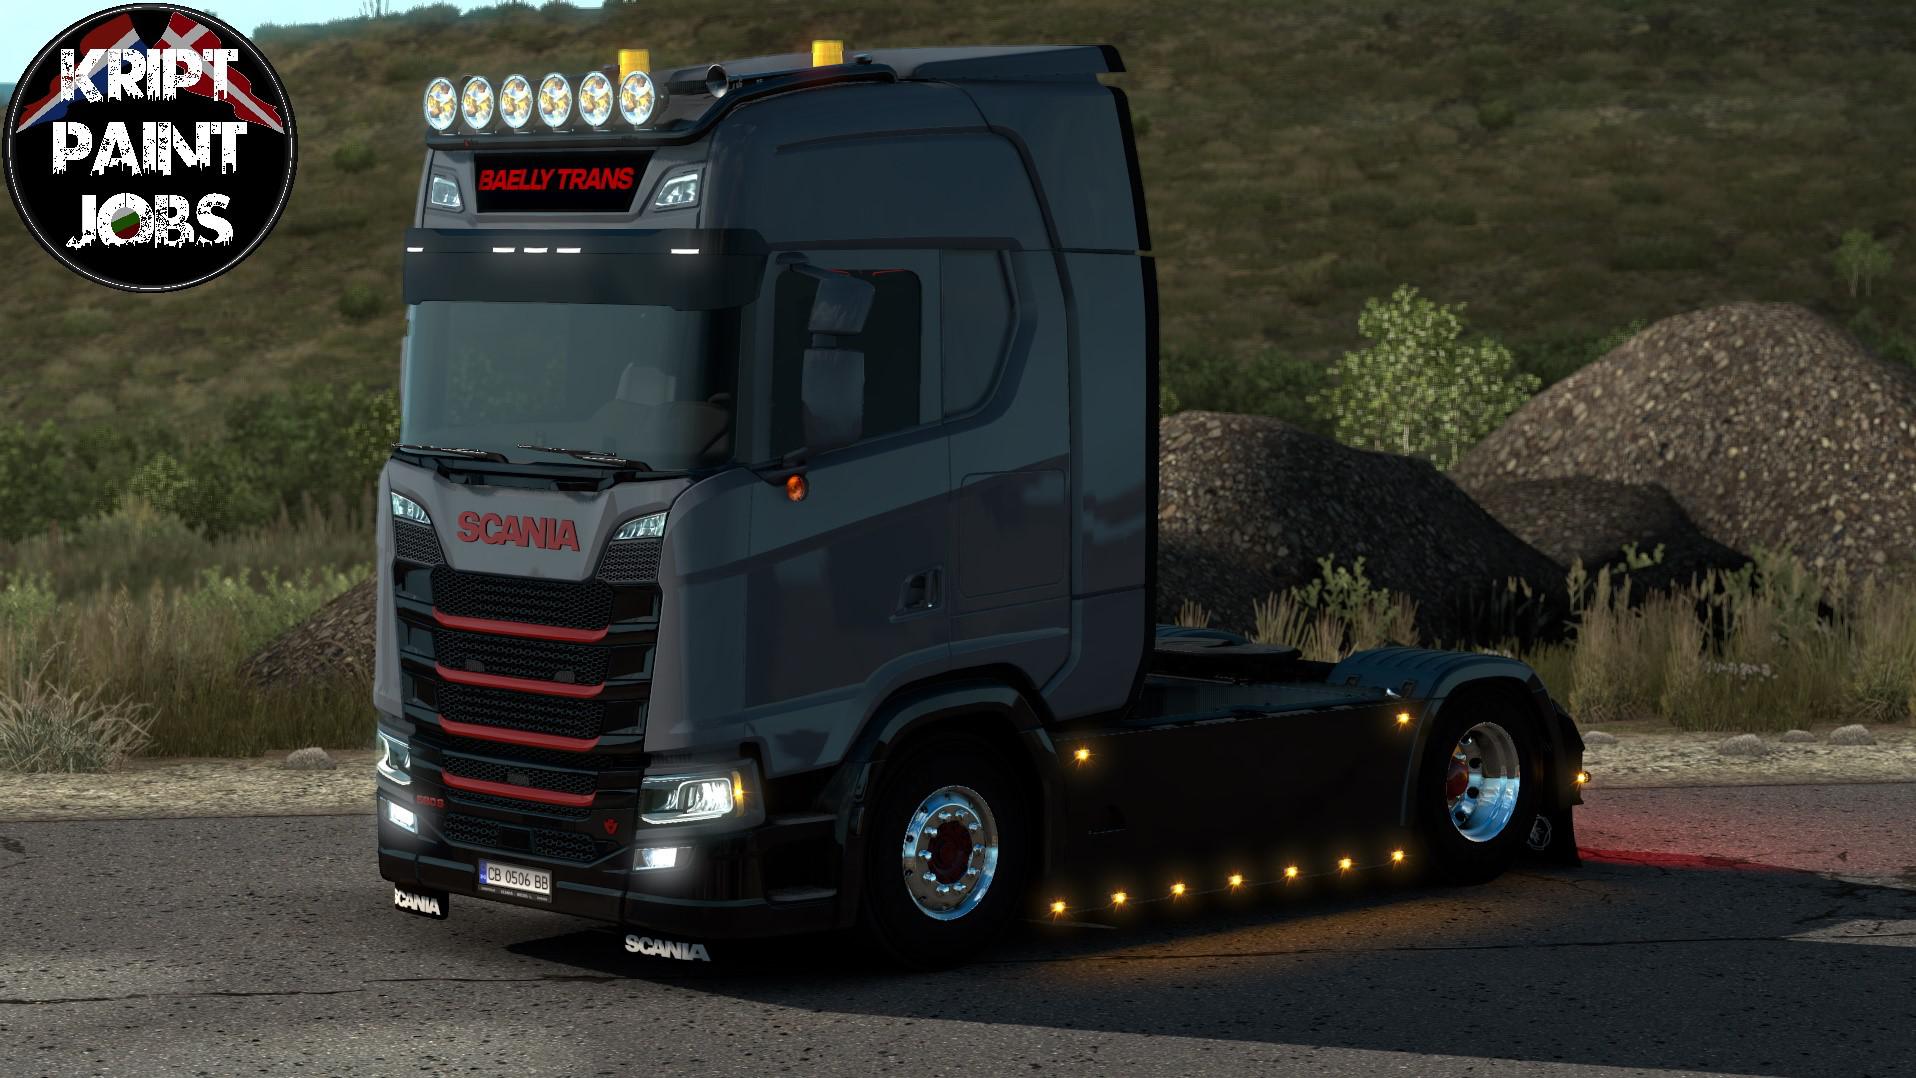 Scania S Baelly Trans V1.0 - Ets 2 Mods, Ets2 Map, Euro Truck Simulator 2 Mods Download